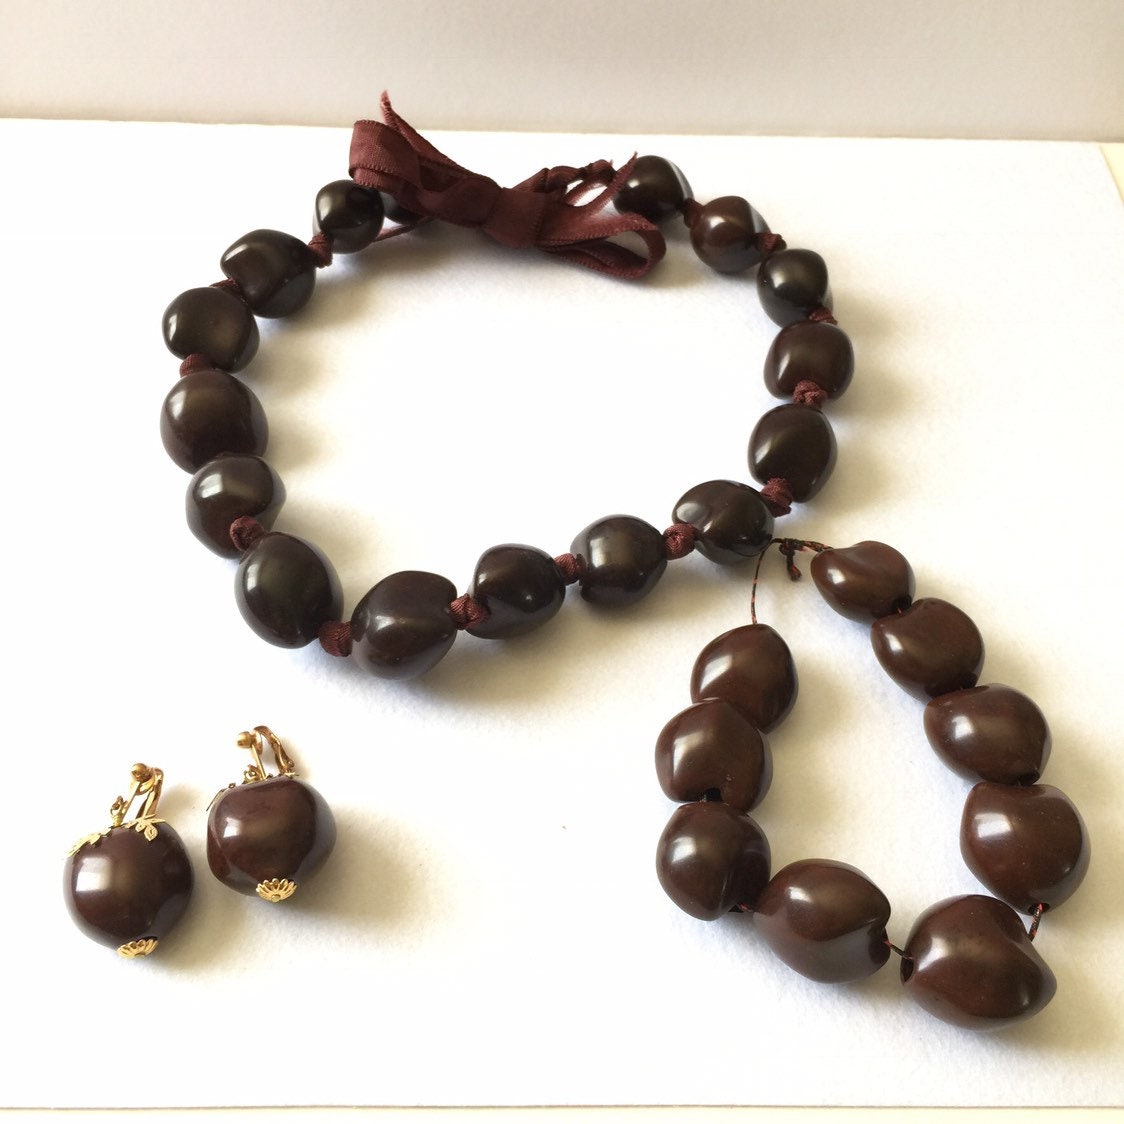 ROYAL KUKUI NUT LEI - Orchid Dynasty